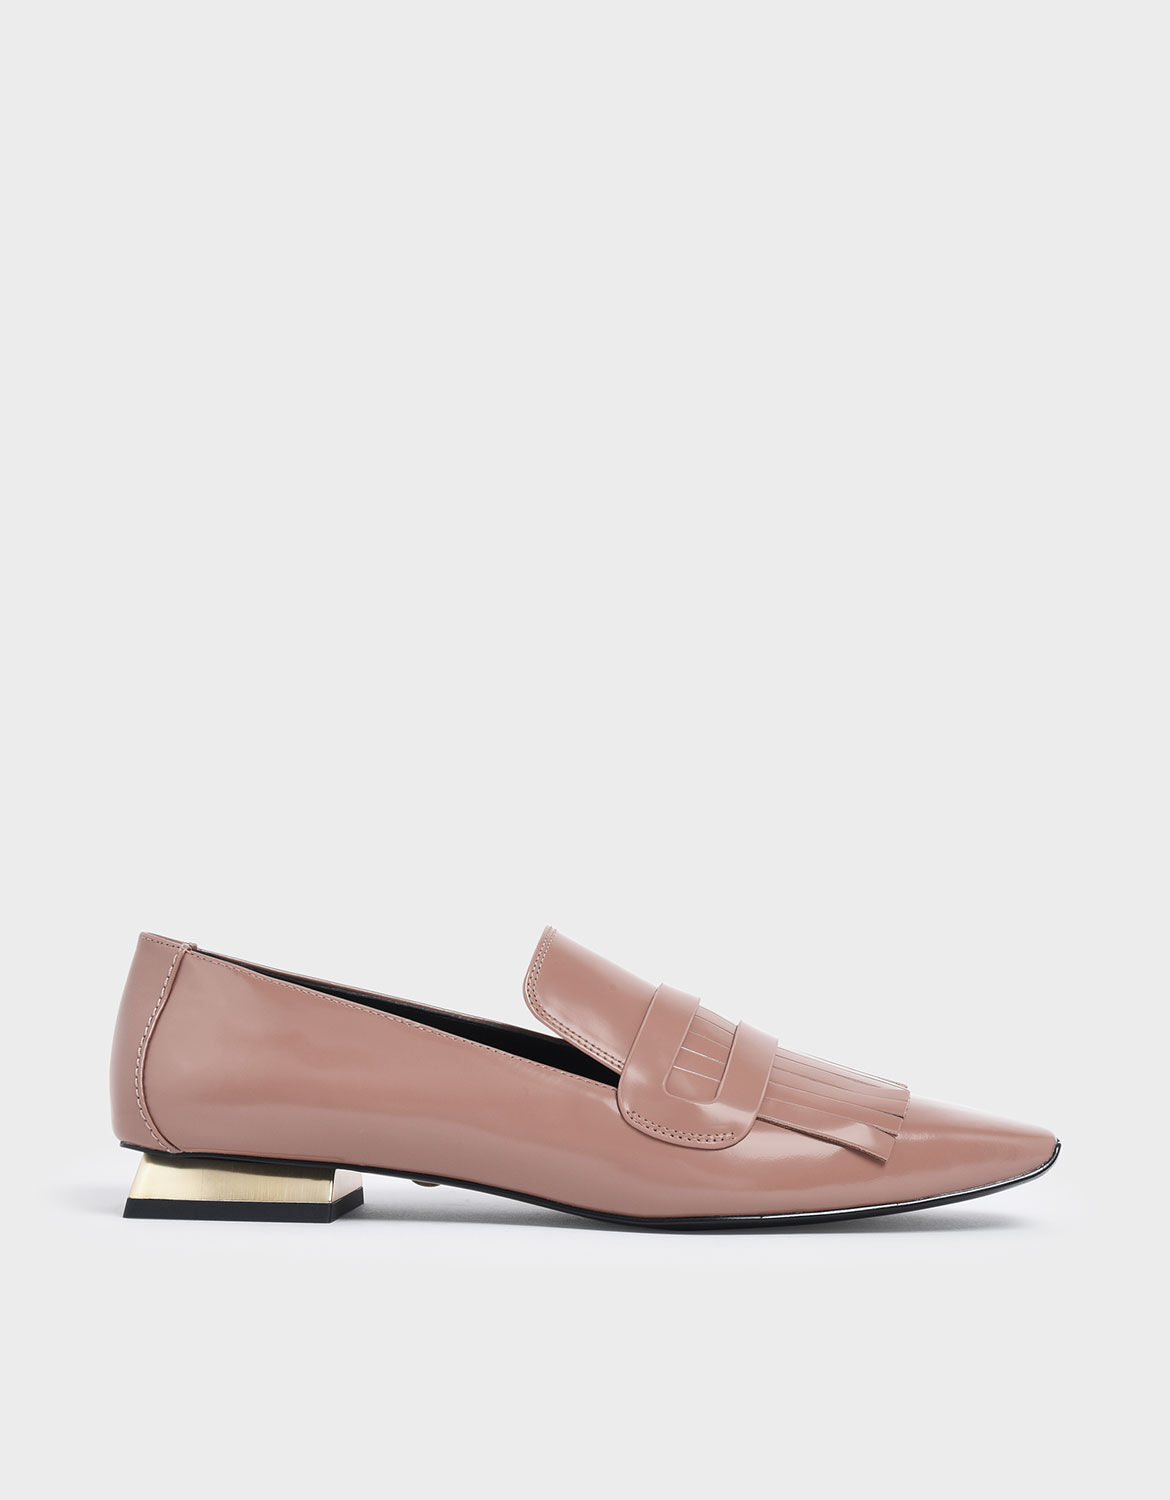 blush loafers